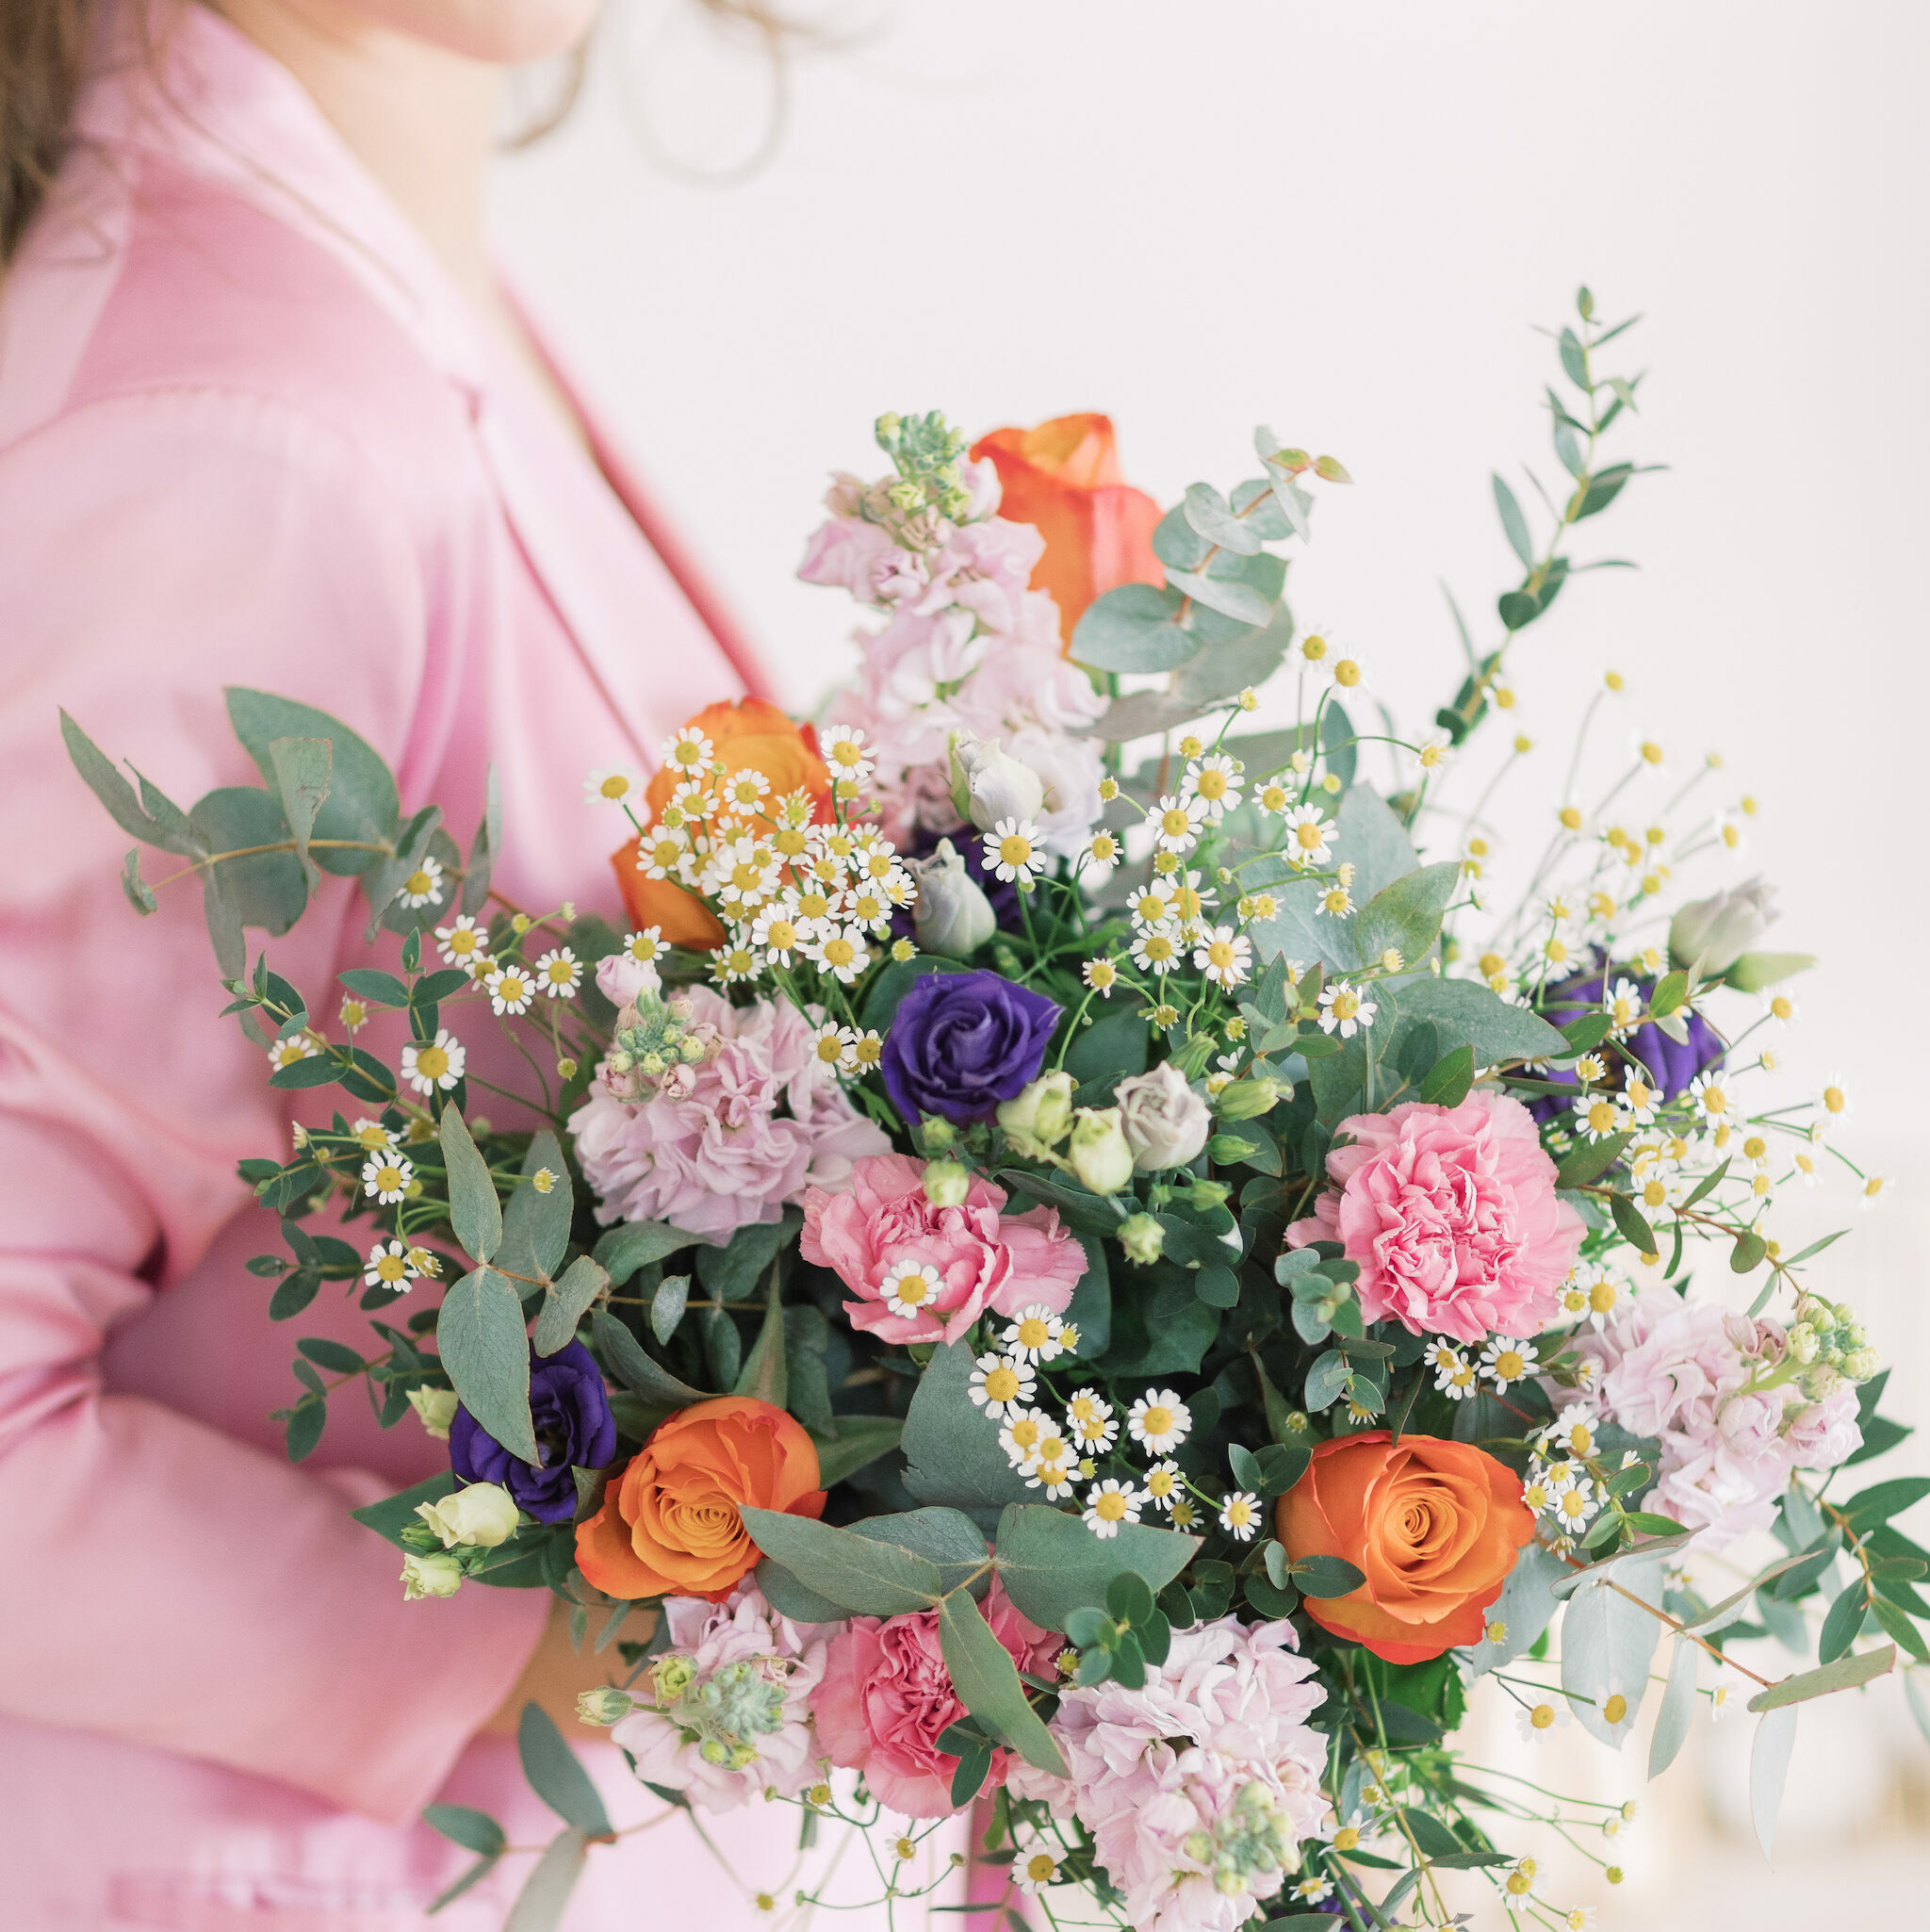 Send a bouquet to Watermael-boitsfort within 24 hours